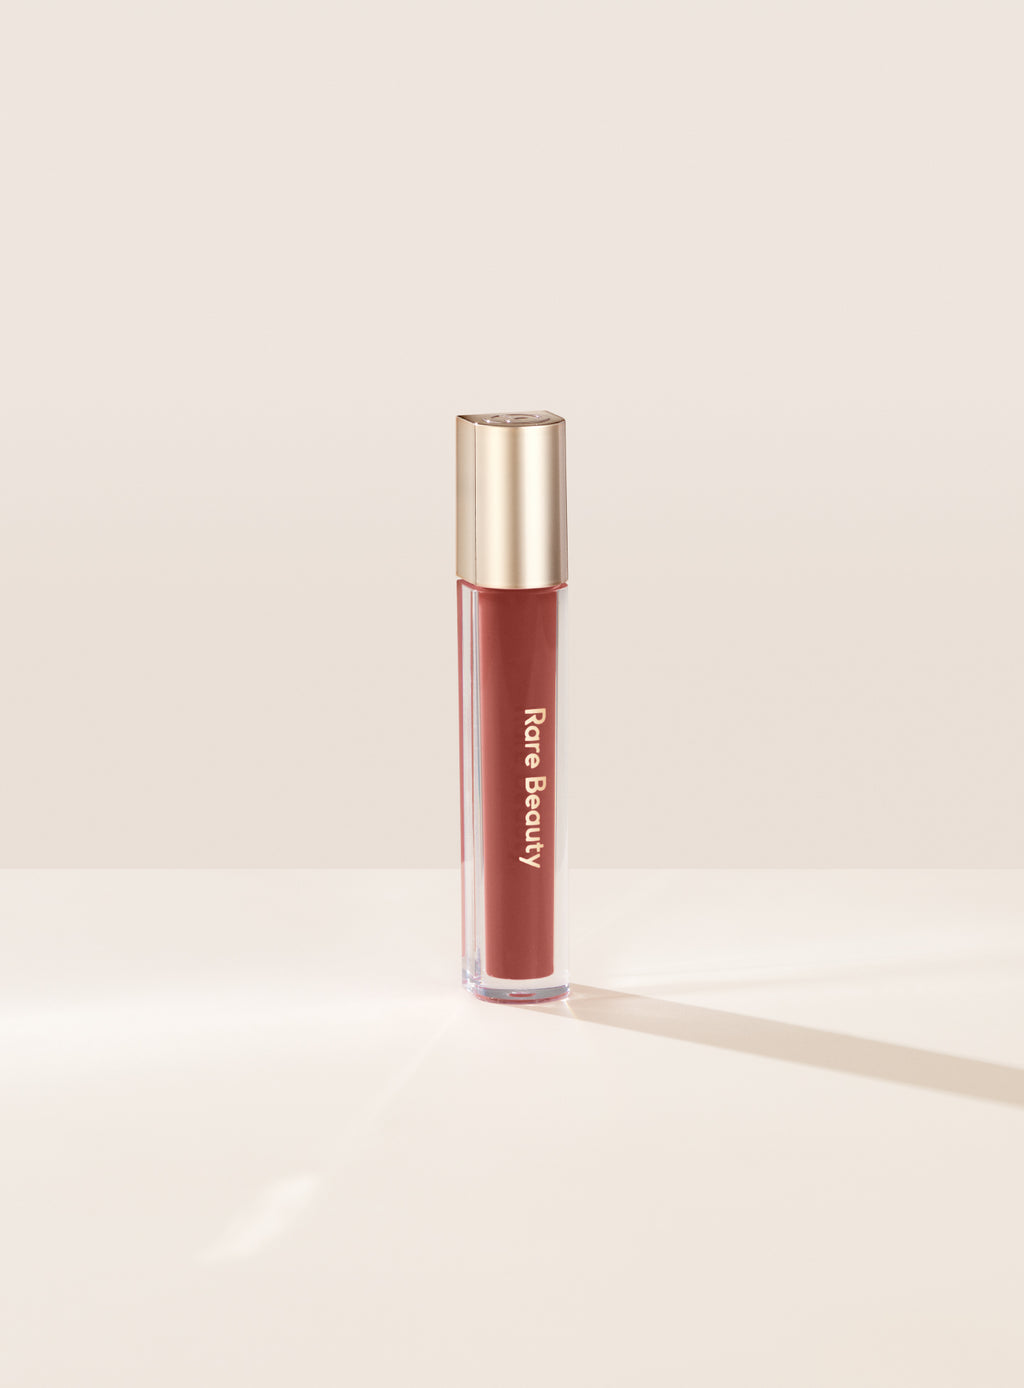 Rare Beauty Nearly Apricot Stay Vulnerable Glossy Lip Balm Review